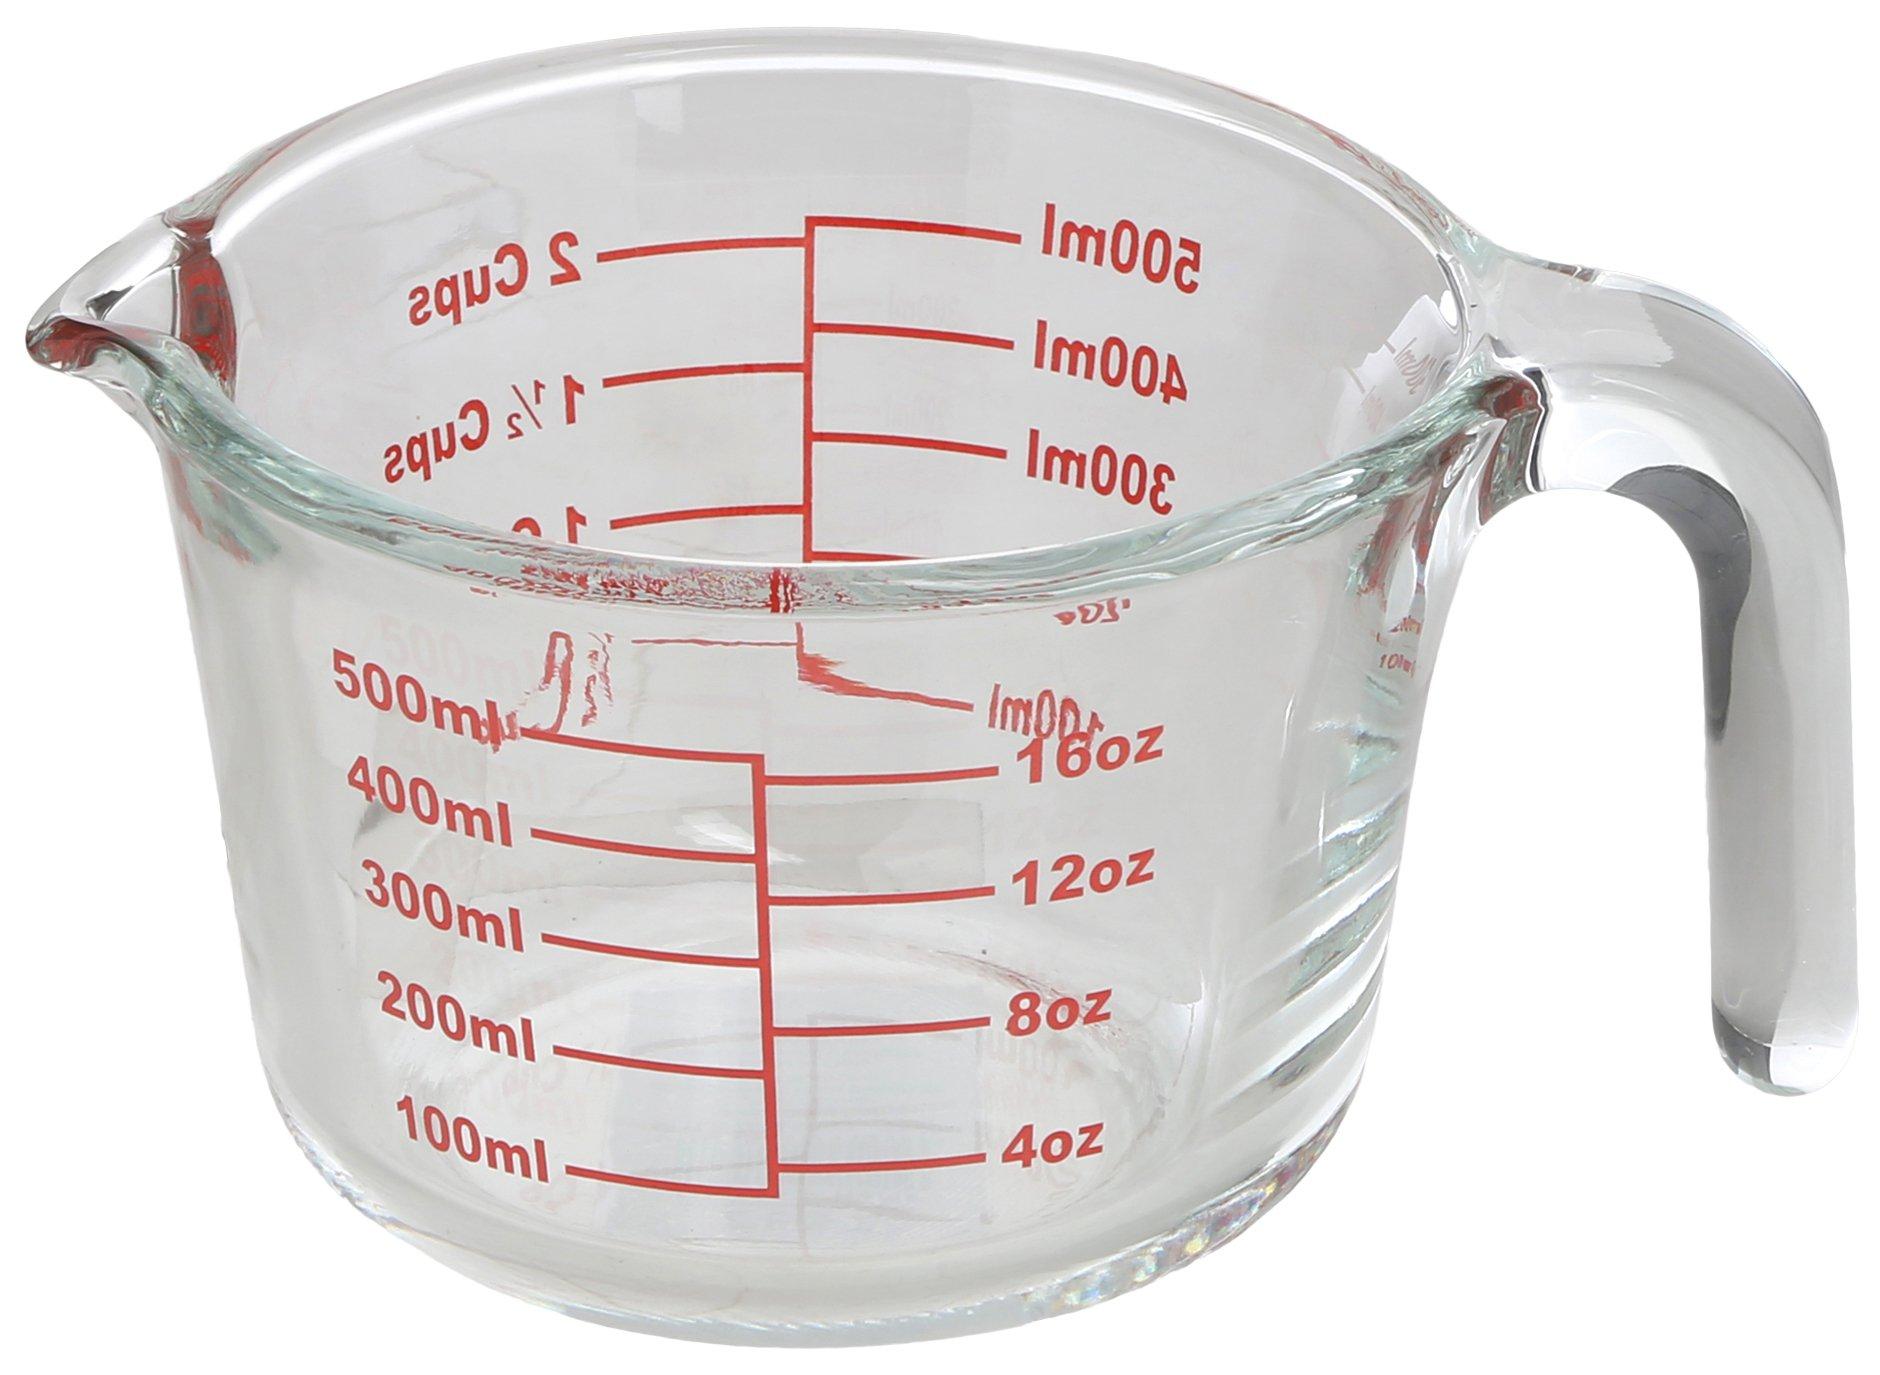 16 oz Glass Measuring Cup - Anchor - Jar Store